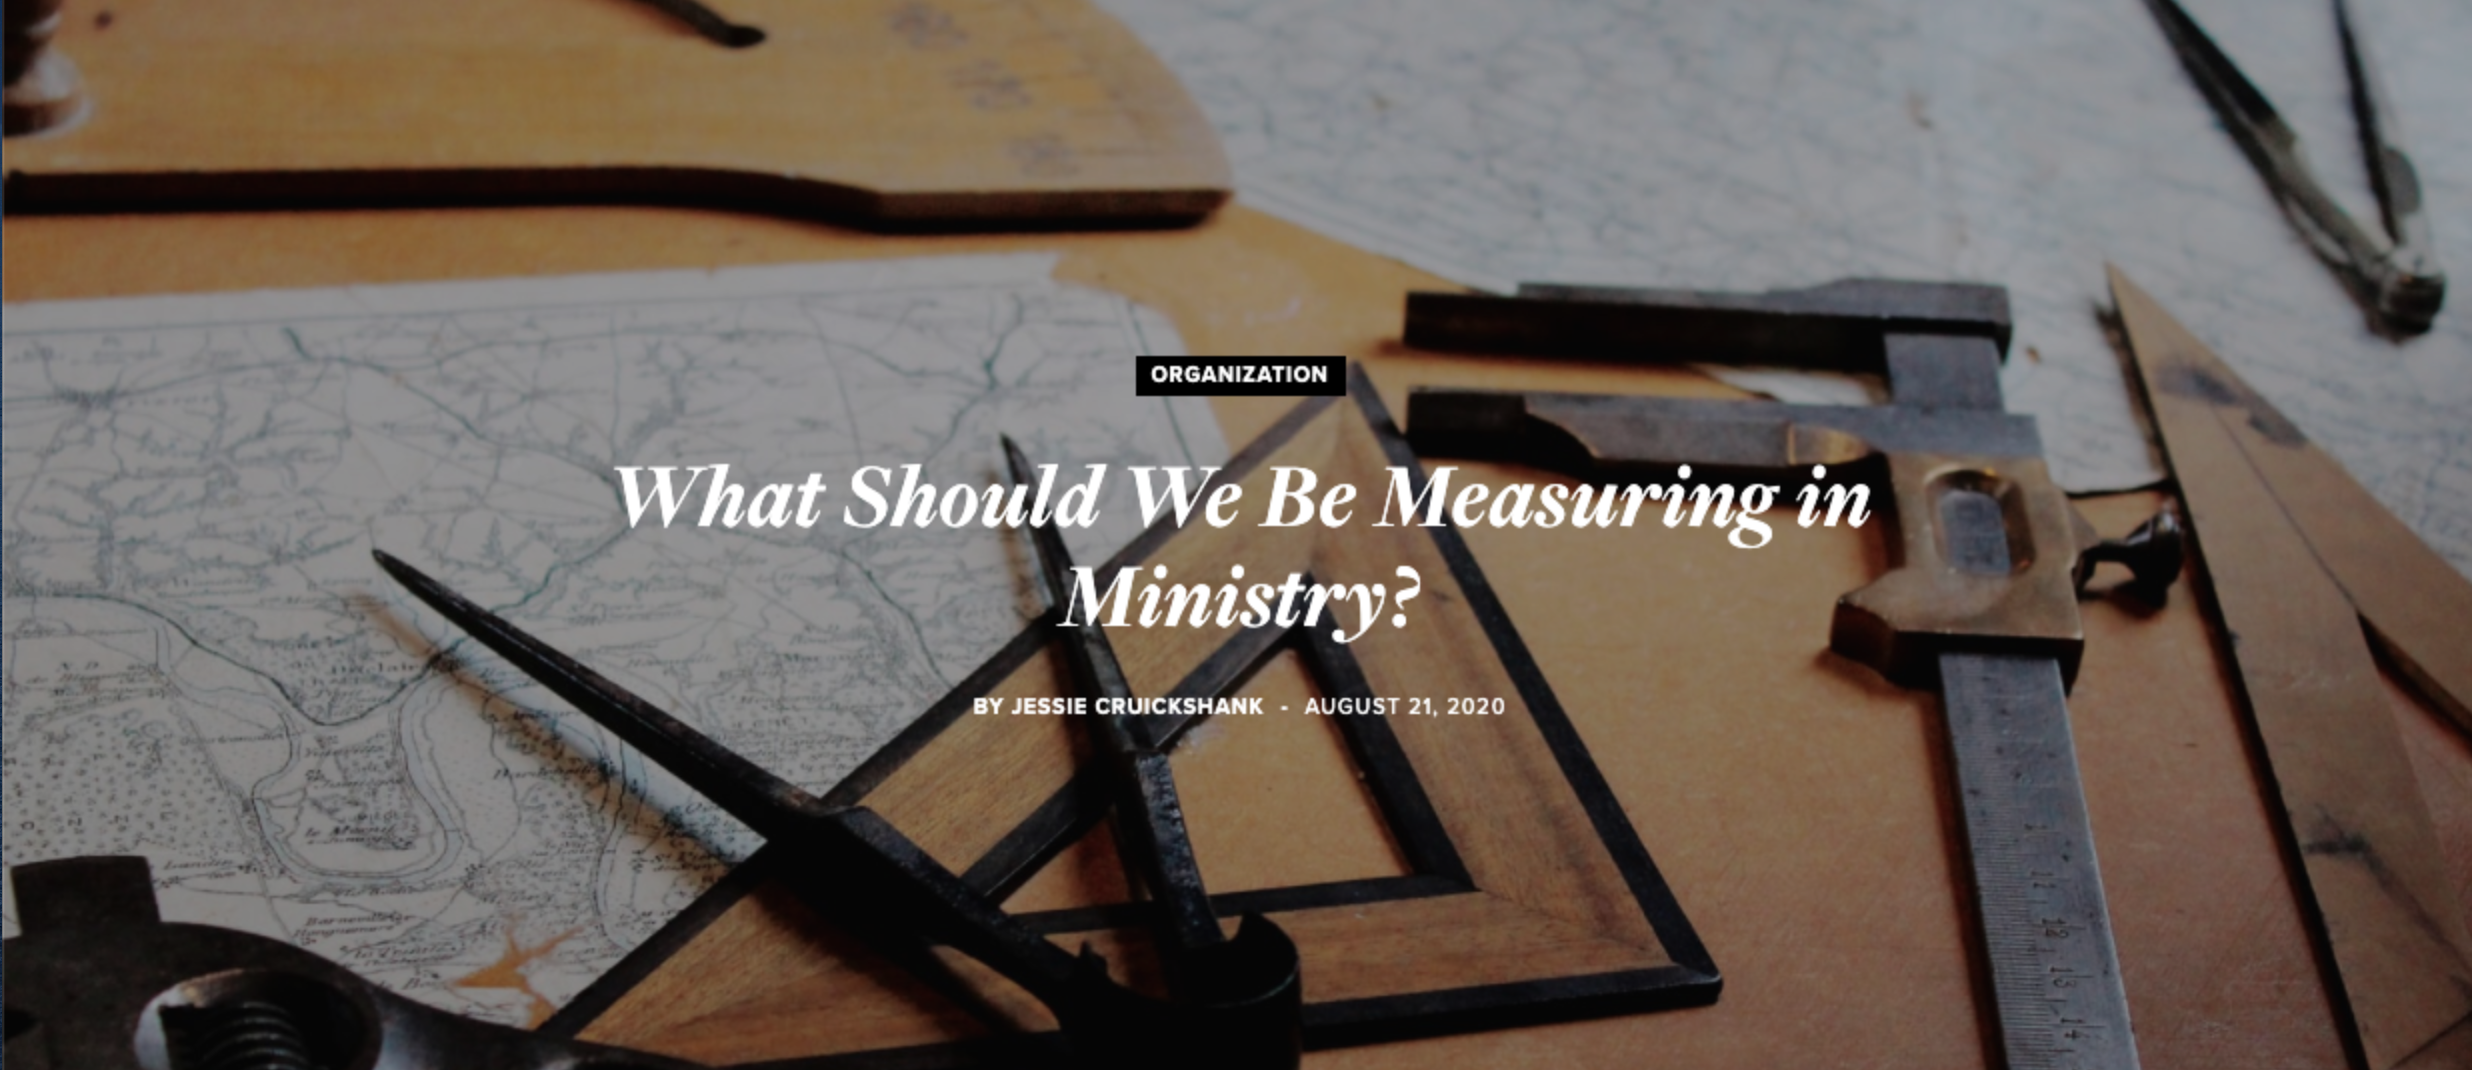 Apples and oranges: What SHOULD we be measuring in ministry?